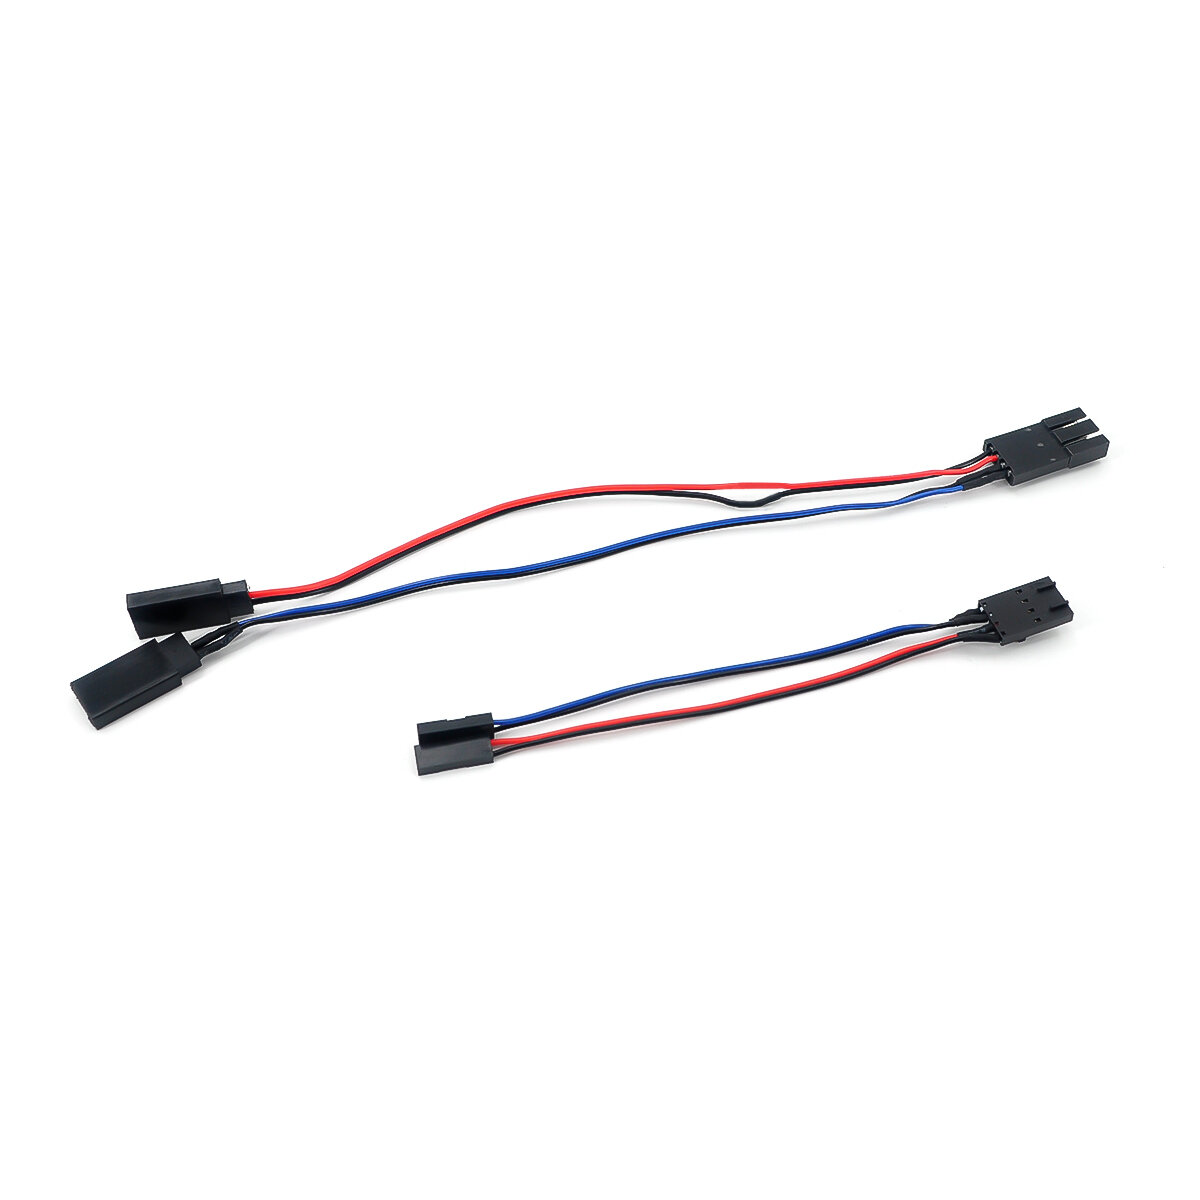 DUMBORC YC Ordinary LED Lights Extended Wires for X6YC RC Receiver Parts